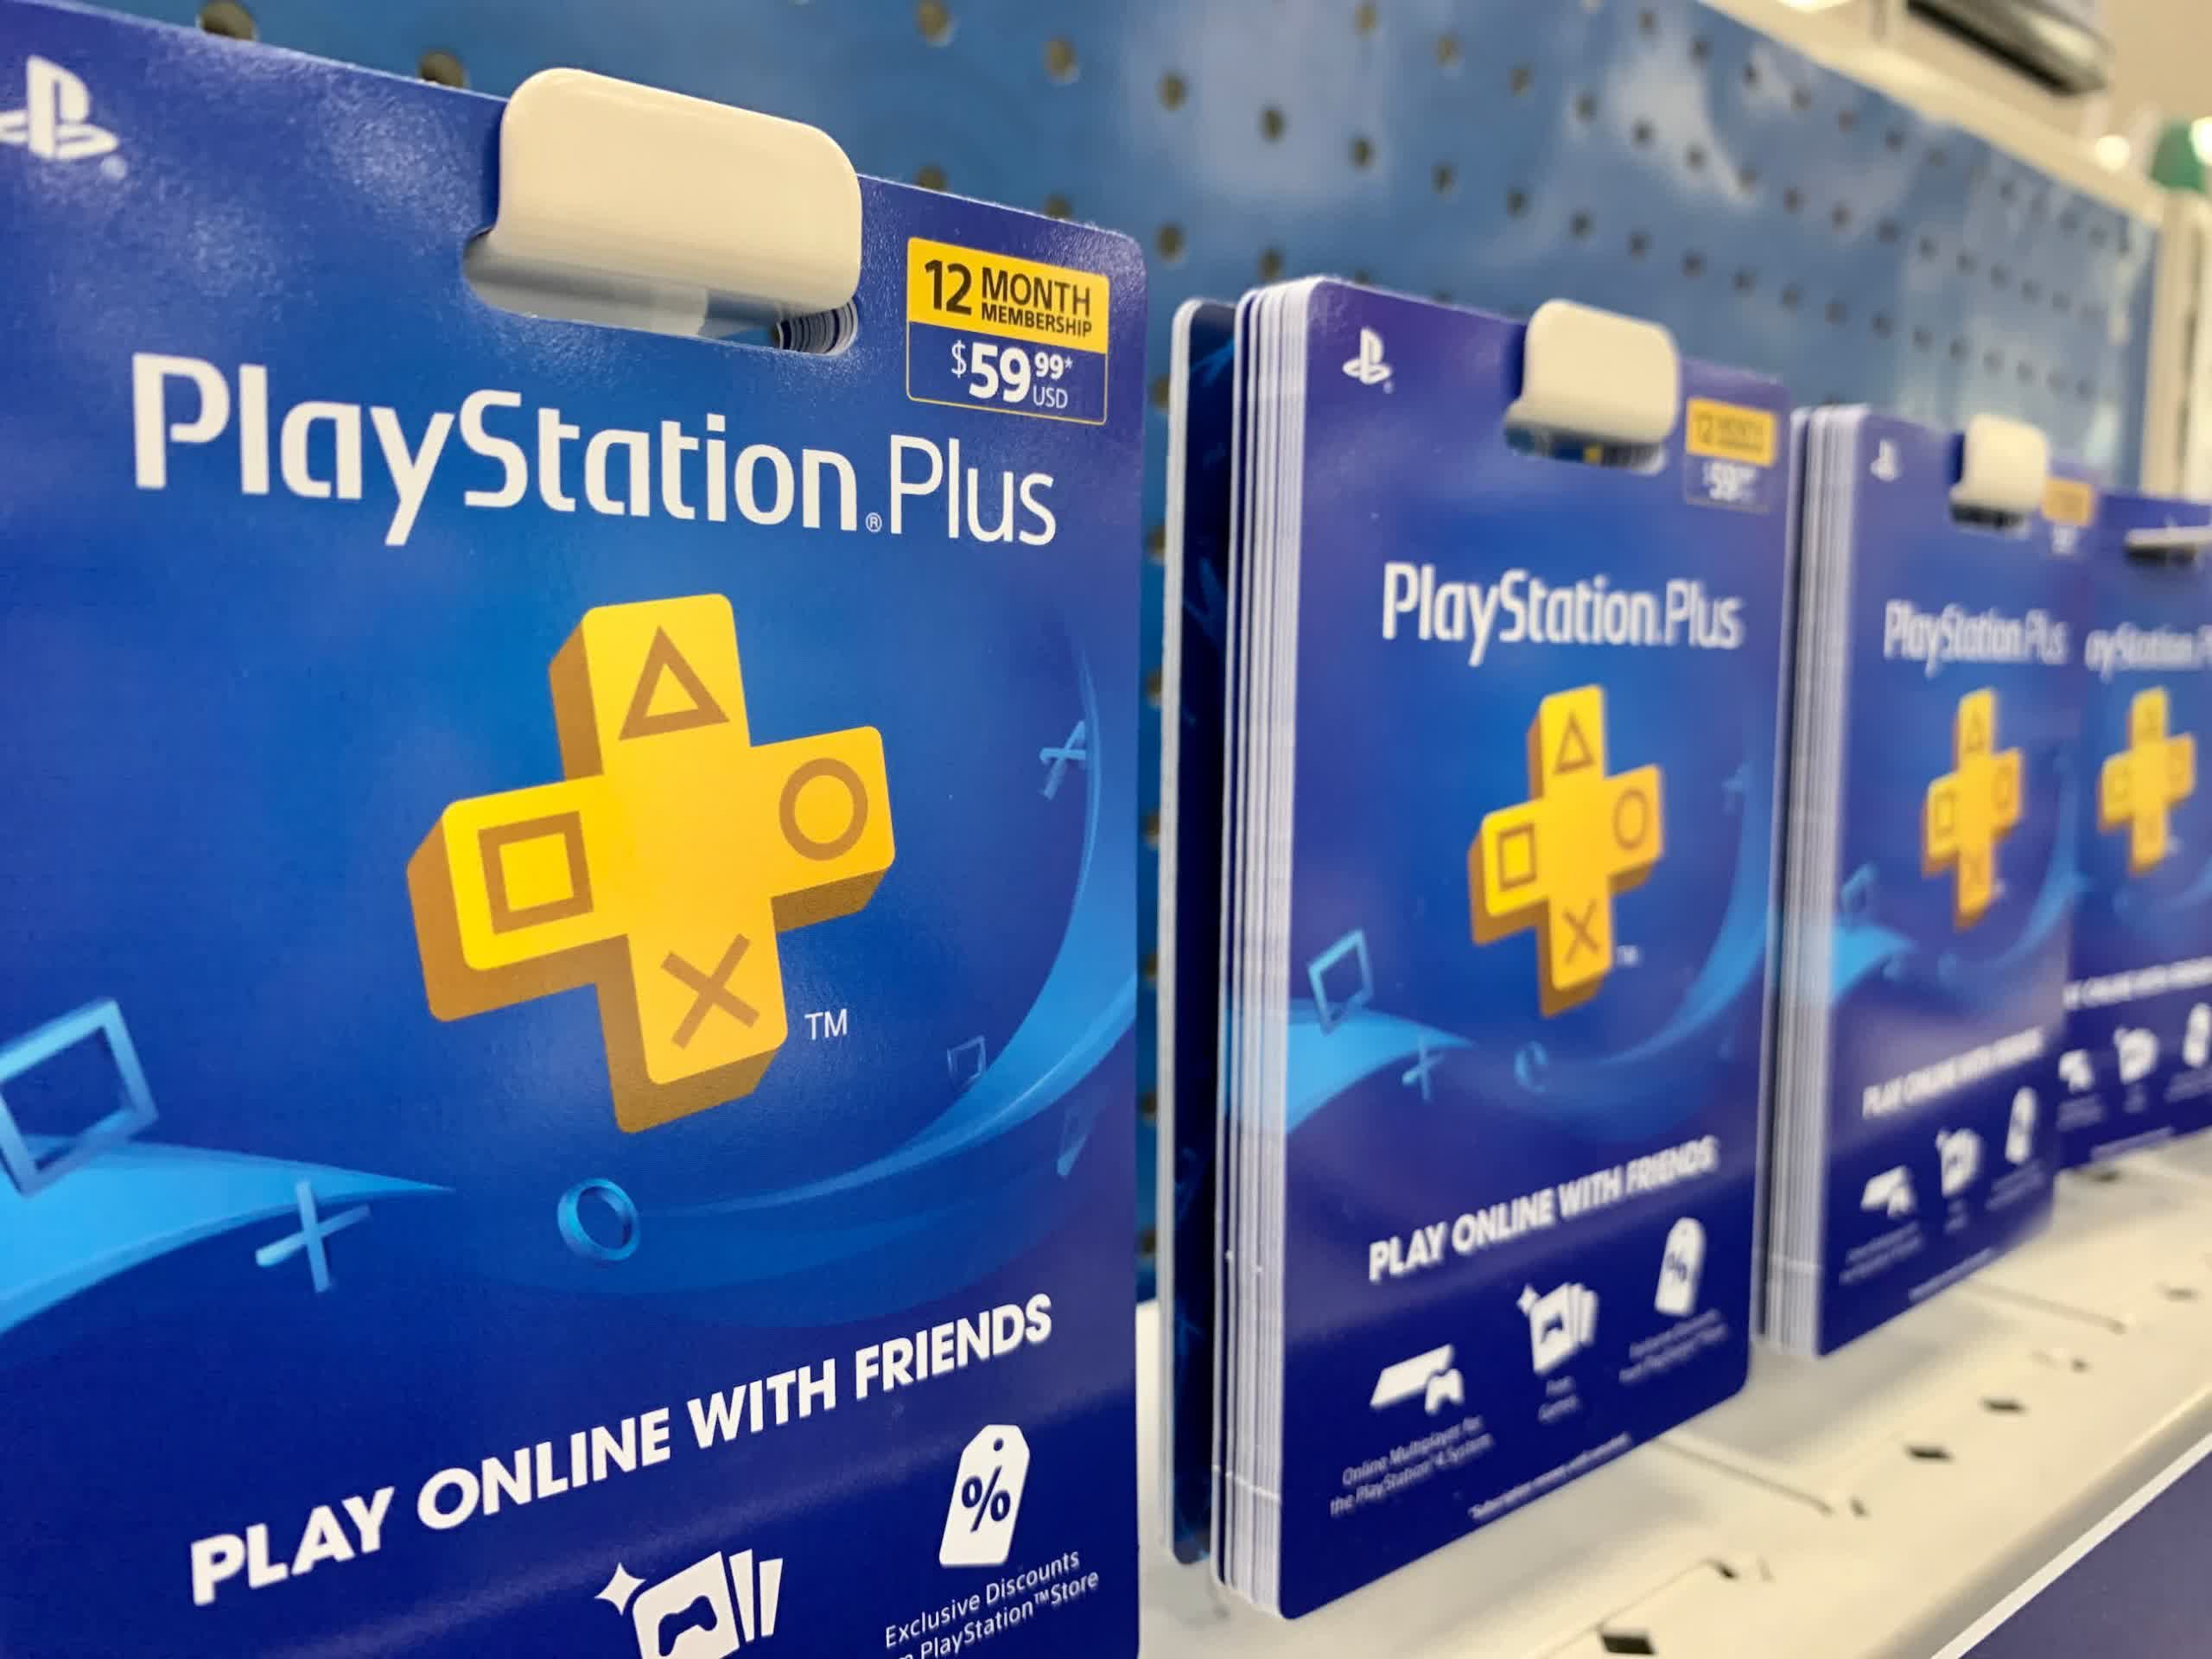 Lawsuit demands $5.9 billion from Sony for ripping off 9 million PlayStation Store users